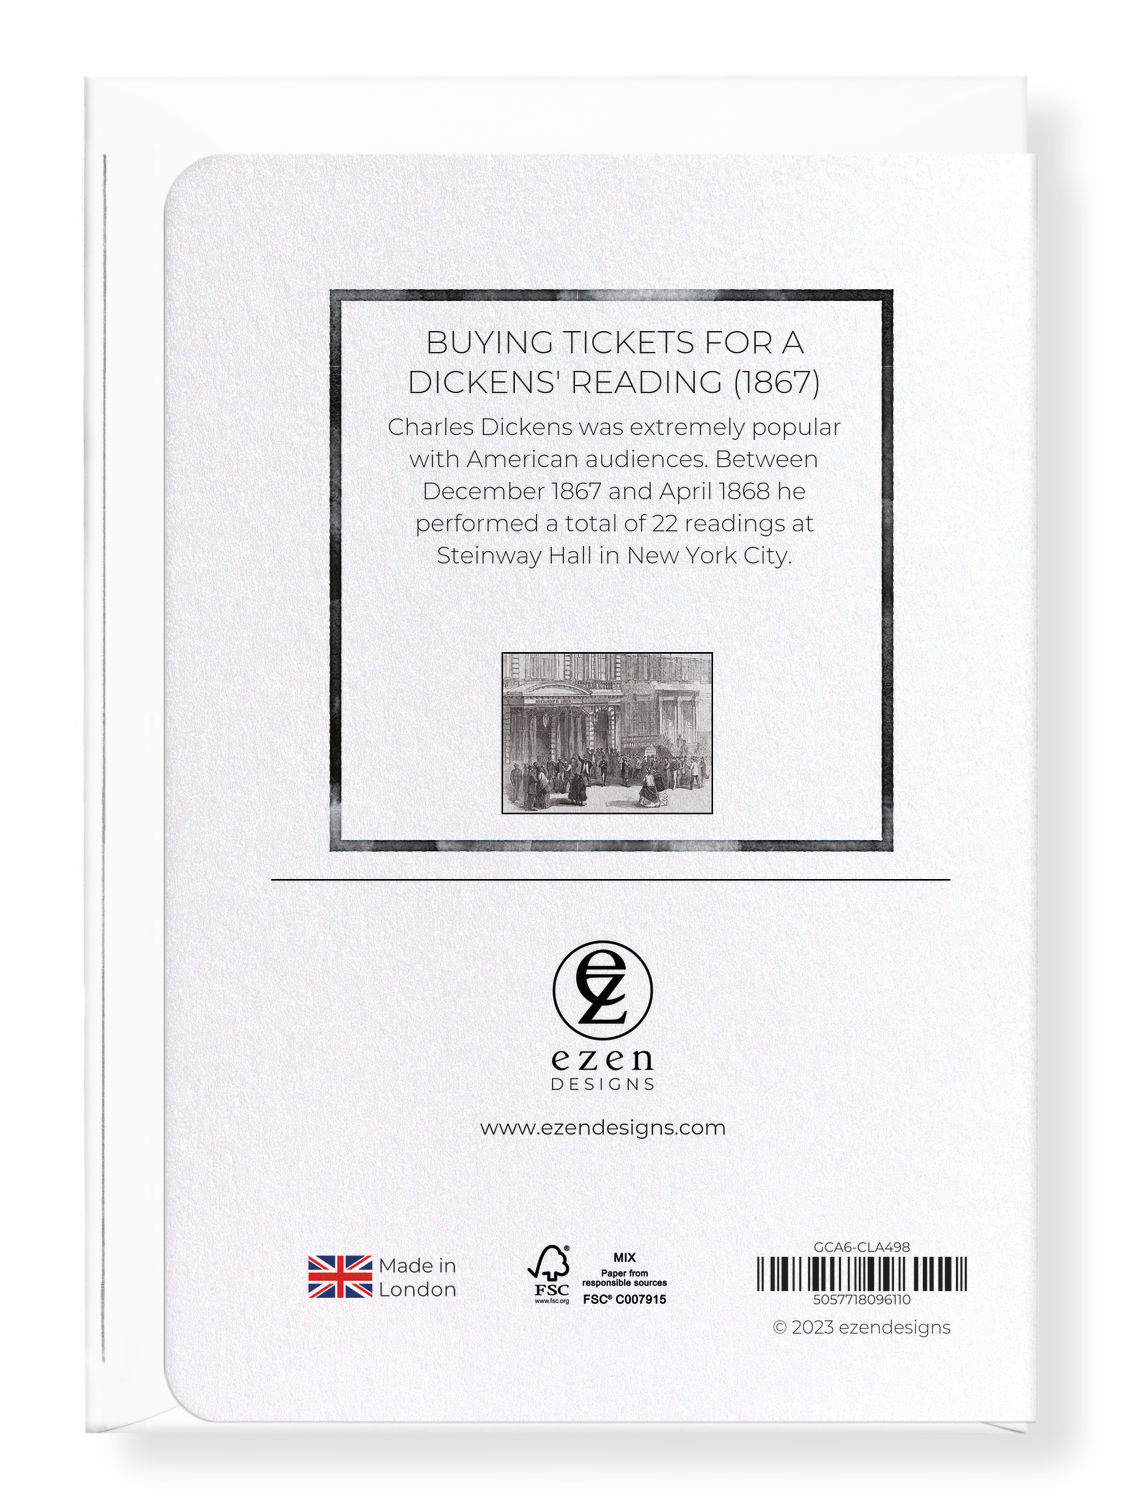 Ezen Designs - Buying Tickets for a Dickens' Reading (1867) - Greeting Card - Back